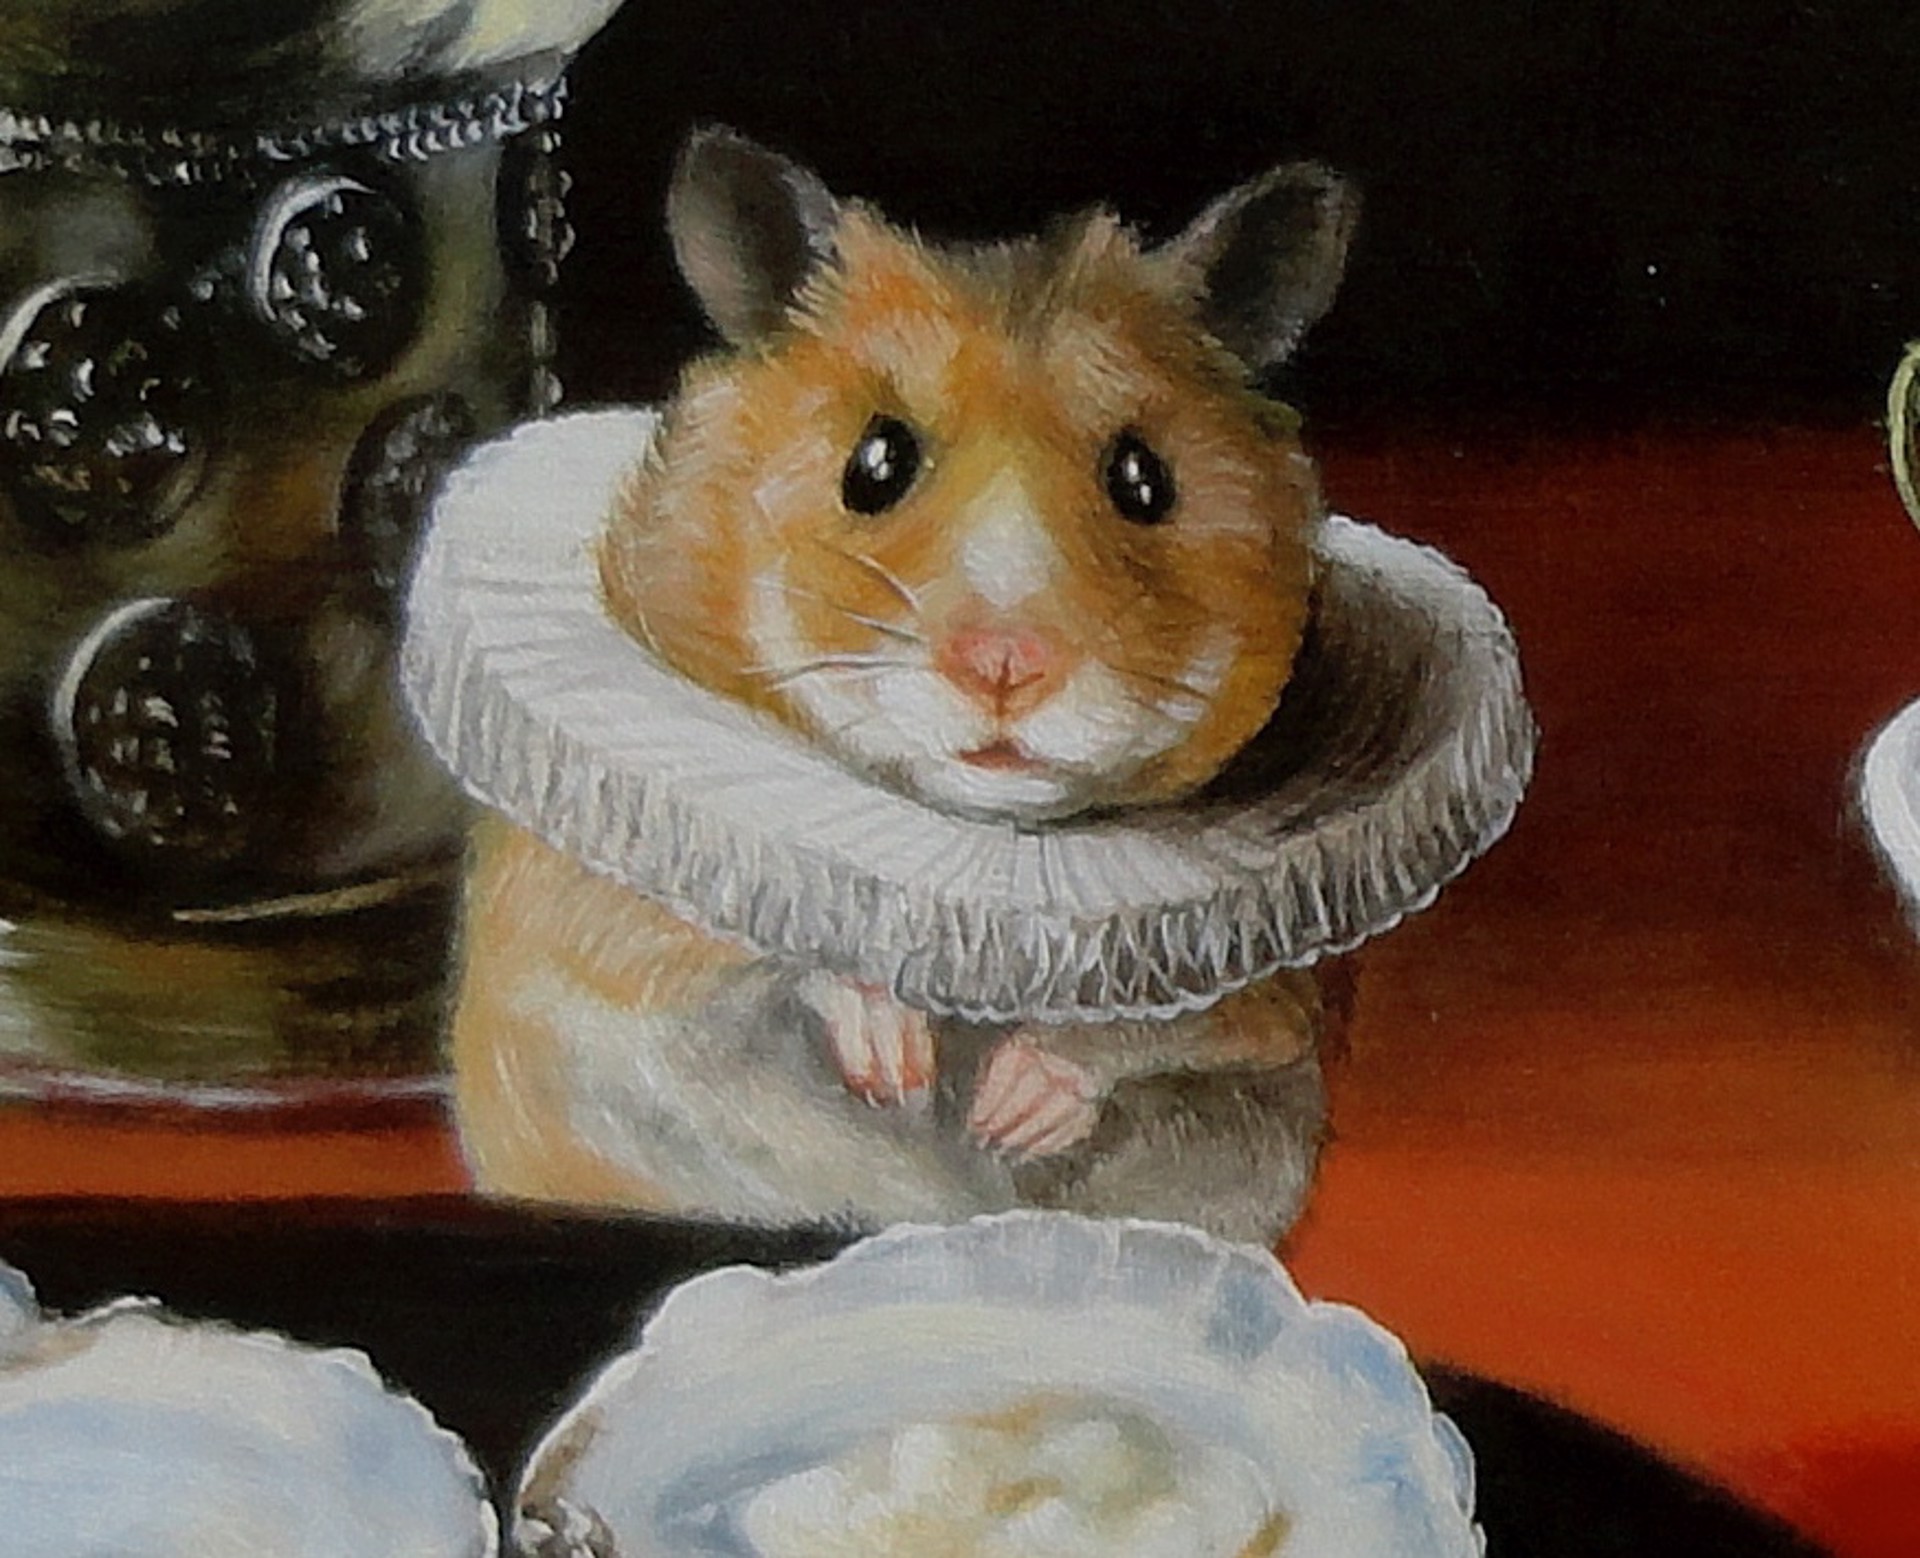 Still Life with Cherries, Oysters, and Hamsters by Frankie Gollub